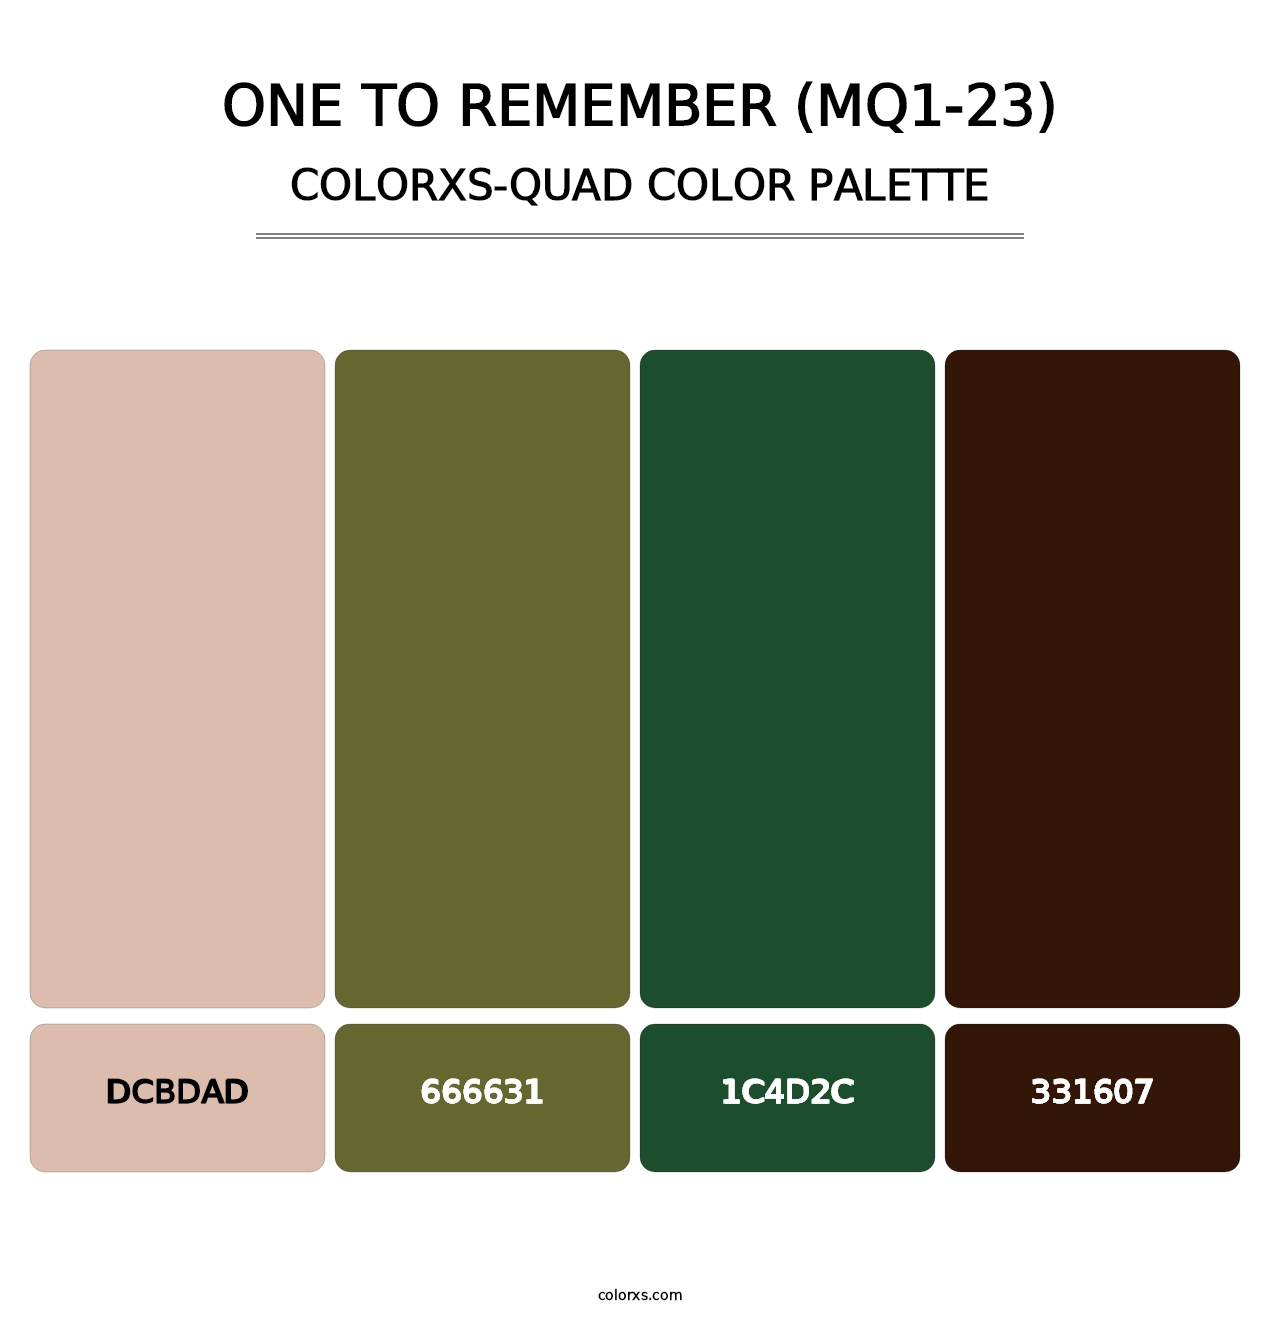 One To Remember (MQ1-23) - Colorxs Quad Palette